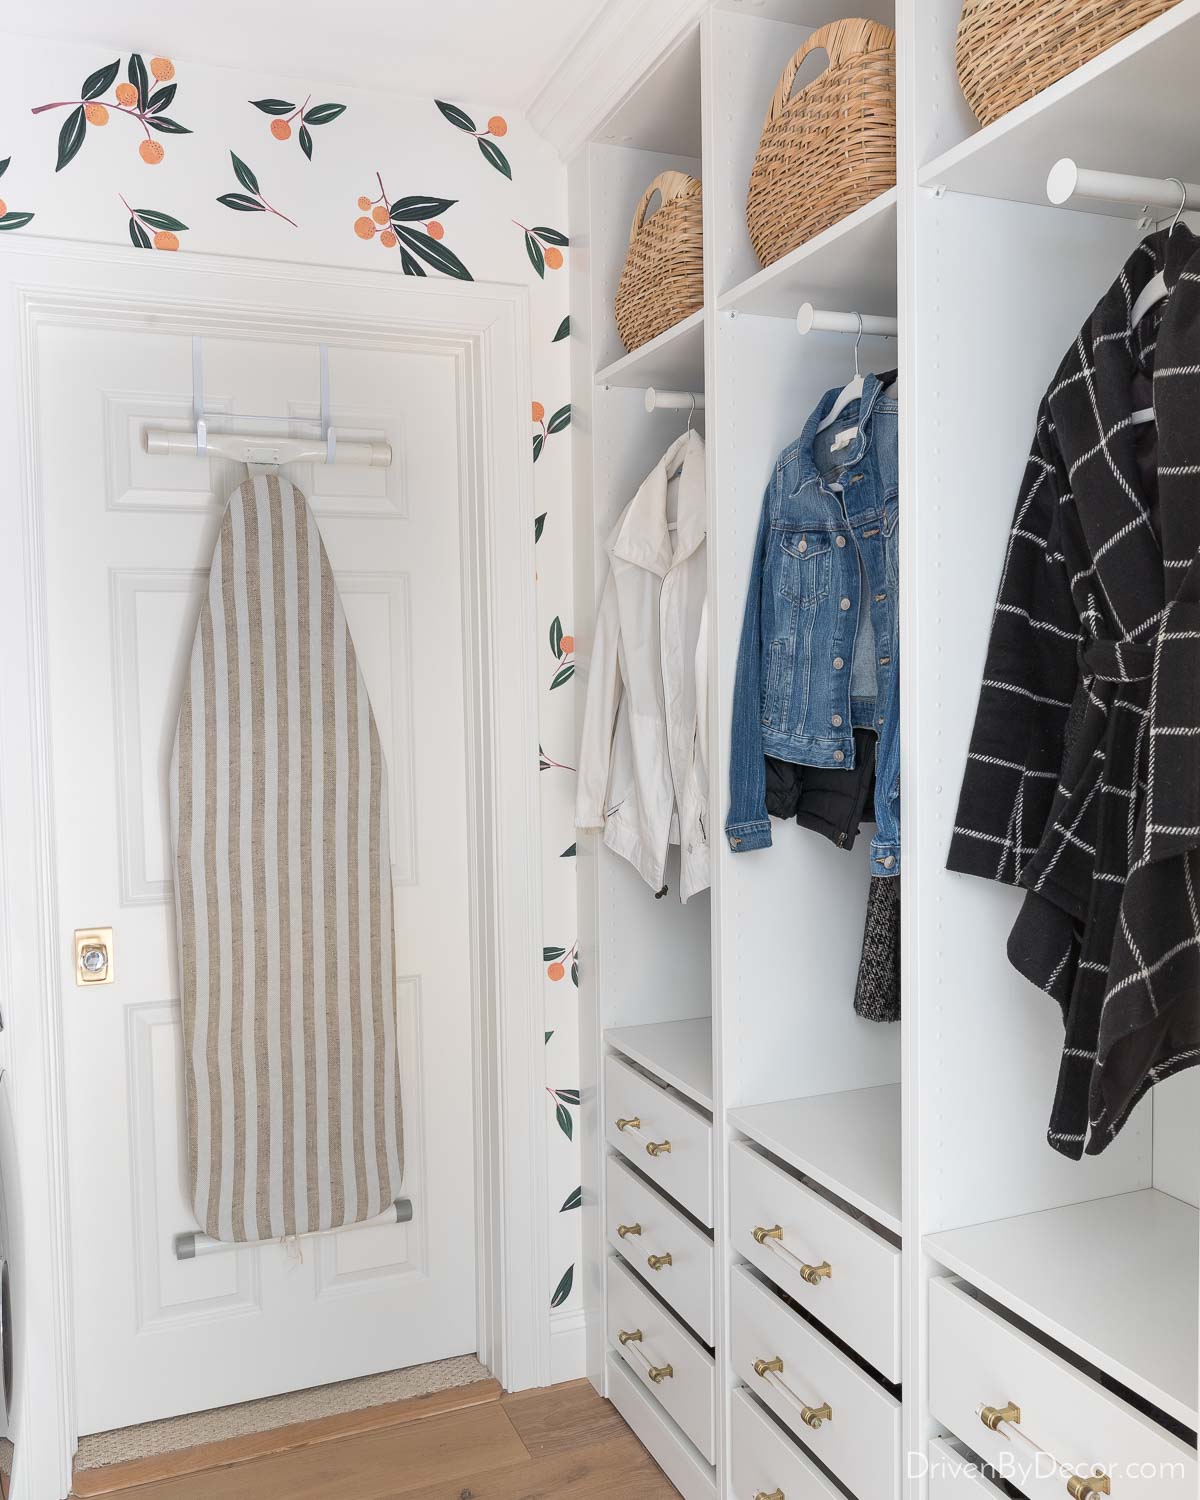 IKEA wardrobes used to create a mudroom